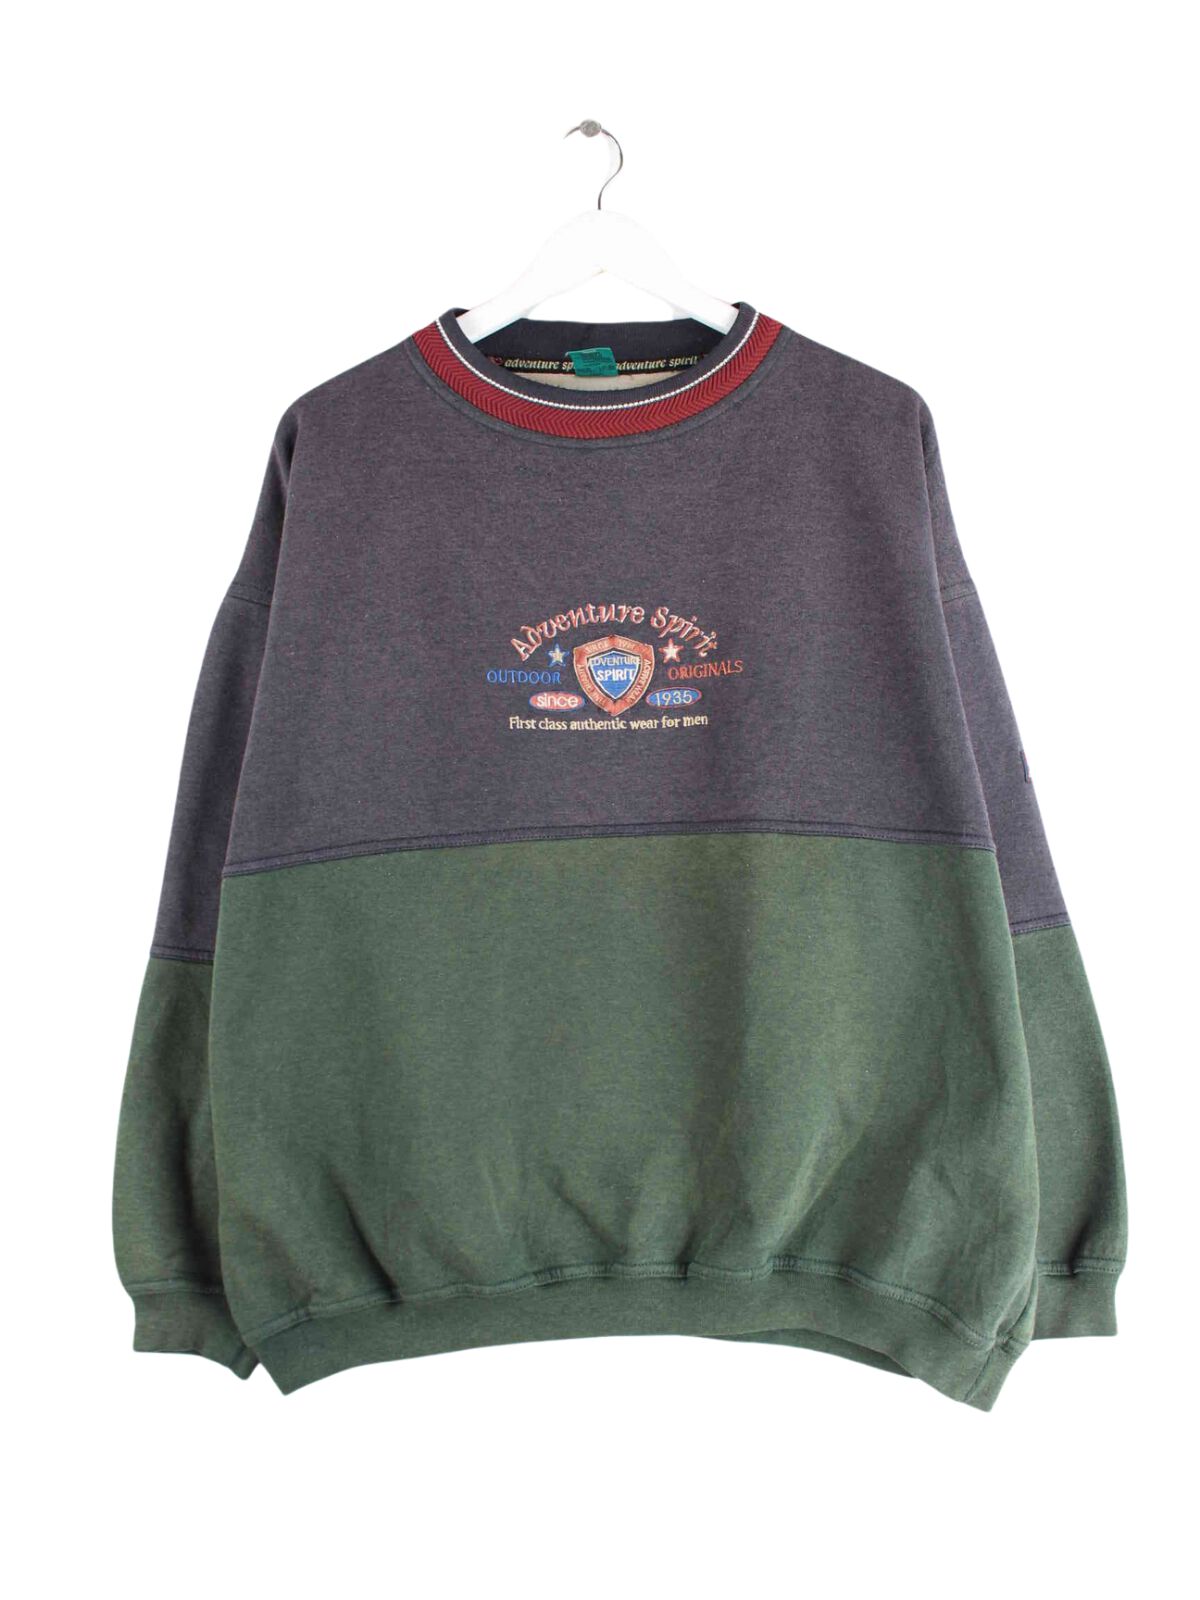 C&A 90s Vintage Embroidered Sweater Grün L (front image)